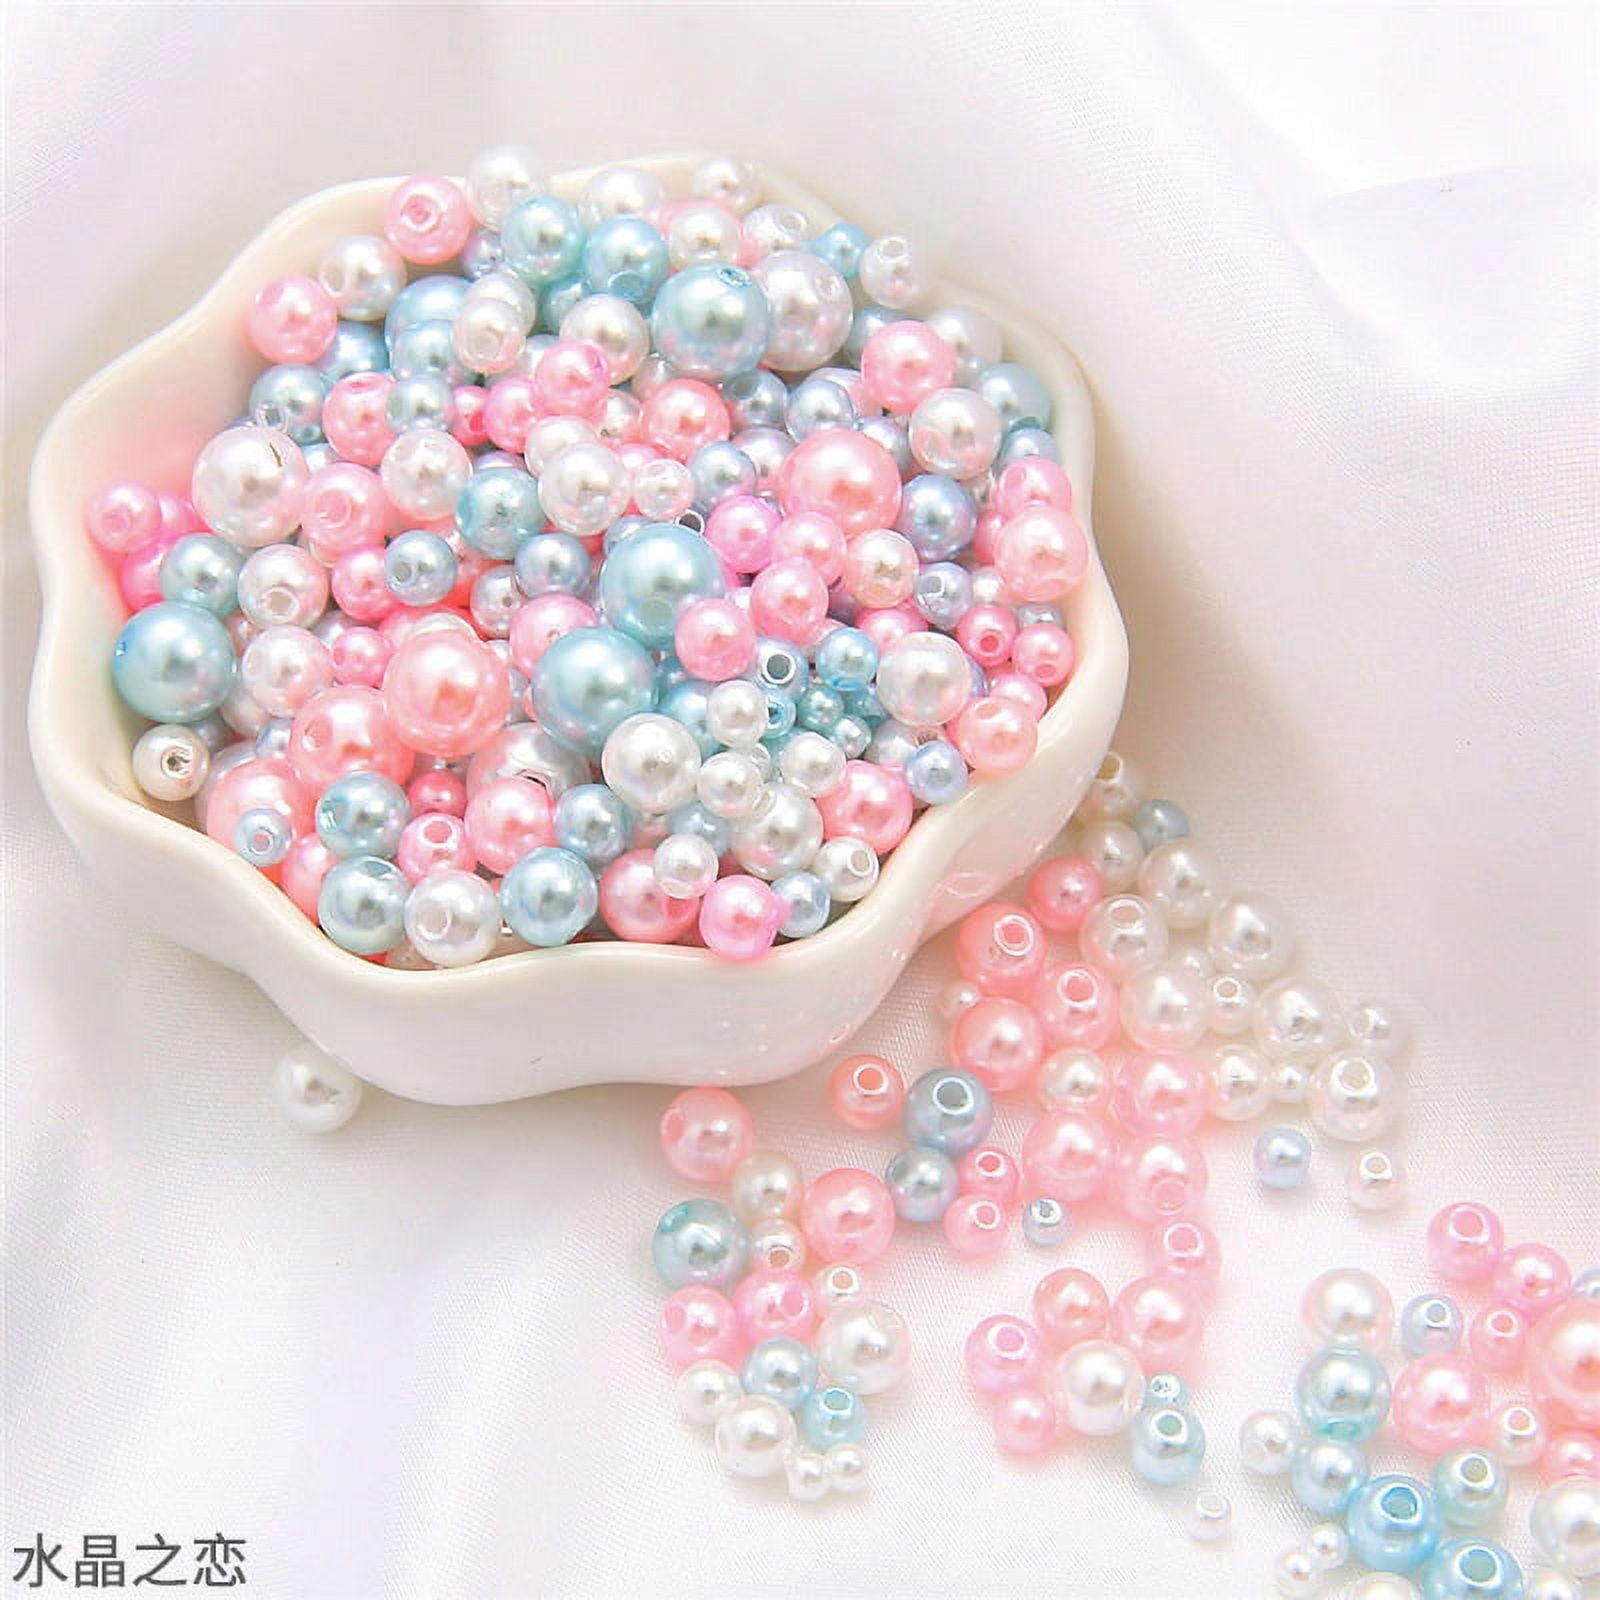 10mm Round Pearl Beads / Milky White Ball Bead / Faux Pearl / Fake Pea, MiniatureSweet, Kawaii Resin Crafts, Decoden Cabochons Supplies